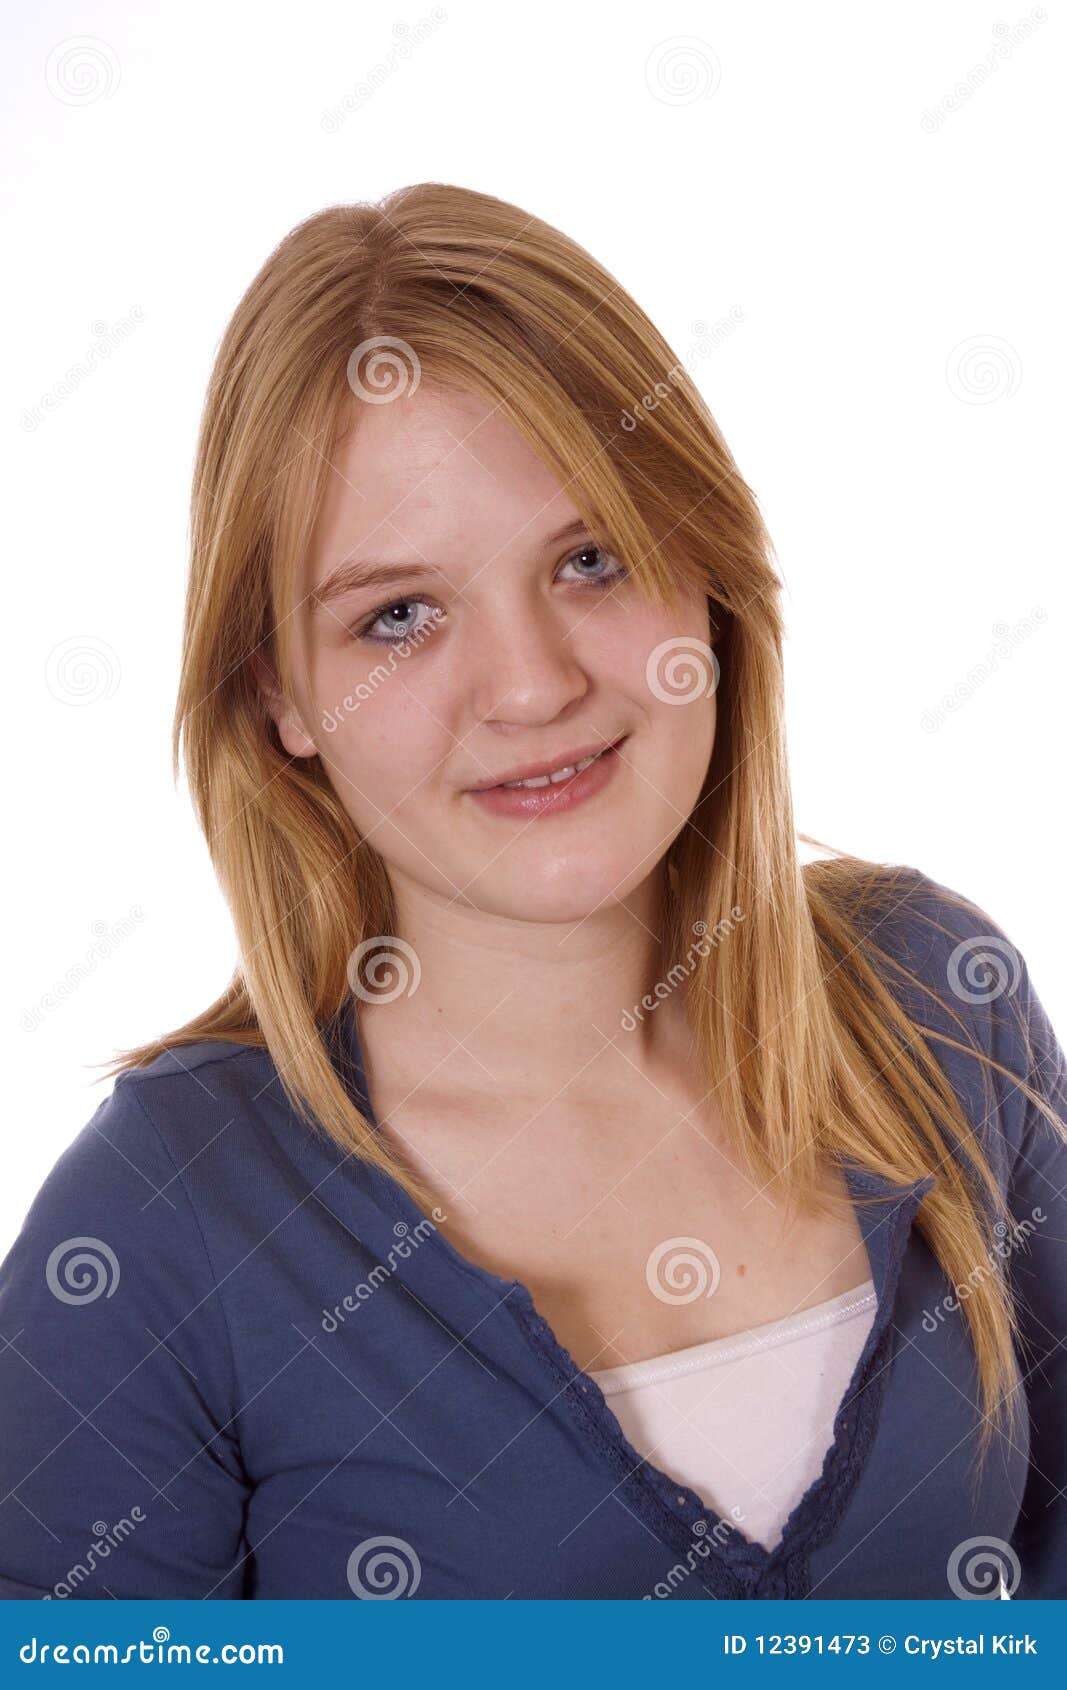 Teengirl with Long Blond Hair Stock Image - Image of smile, isolated ...